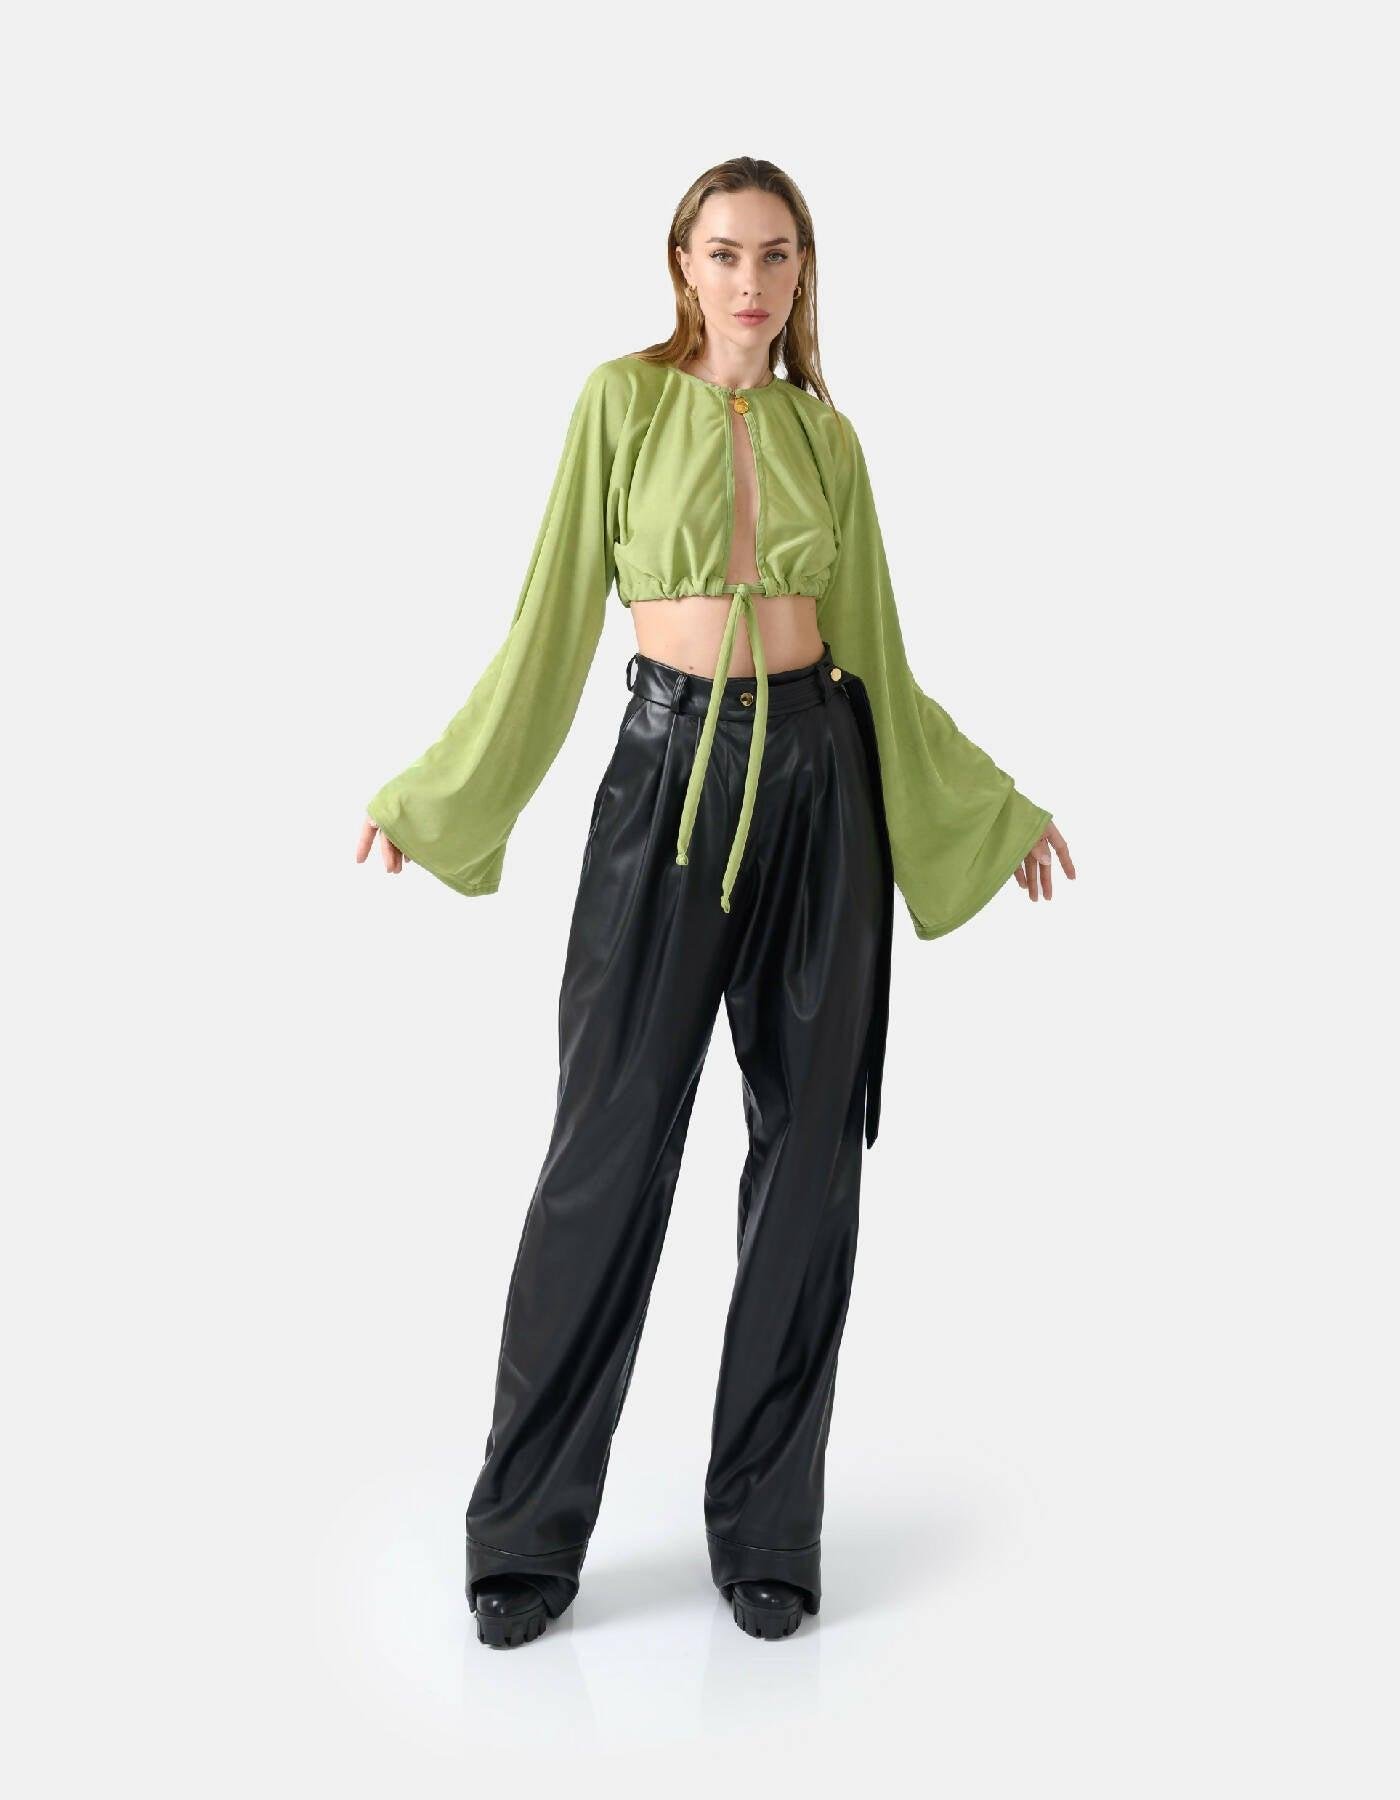 Serenity Cropped Cardigan Green by KARGEDE